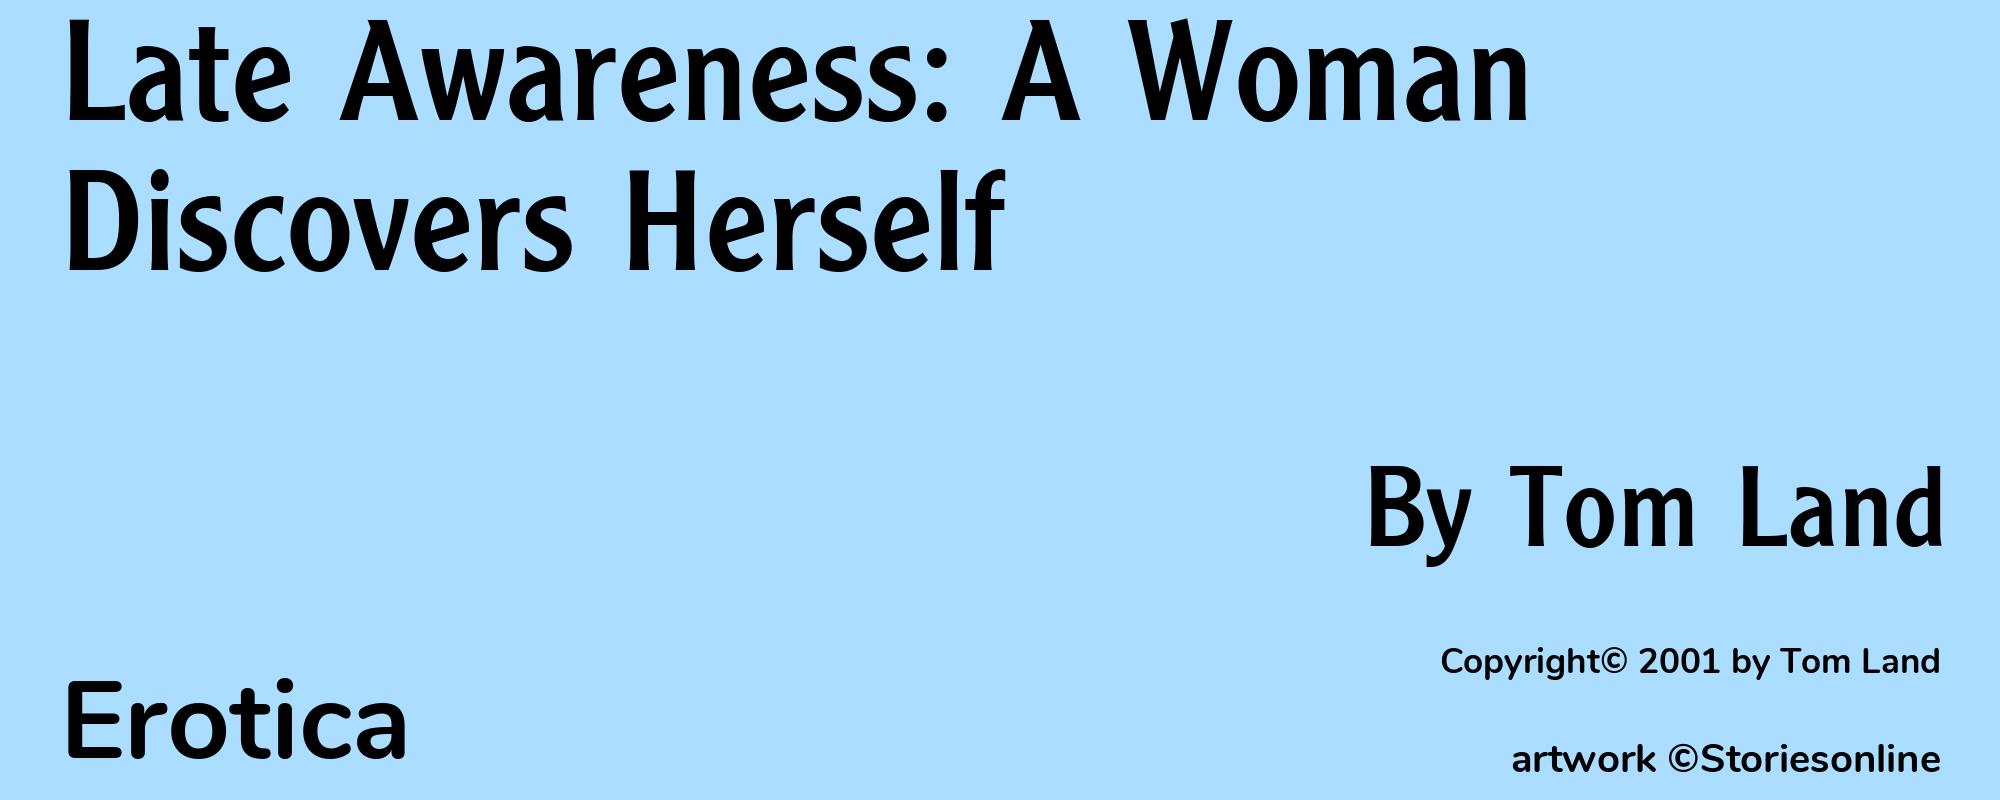 Late Awareness: A Woman Discovers Herself - Cover